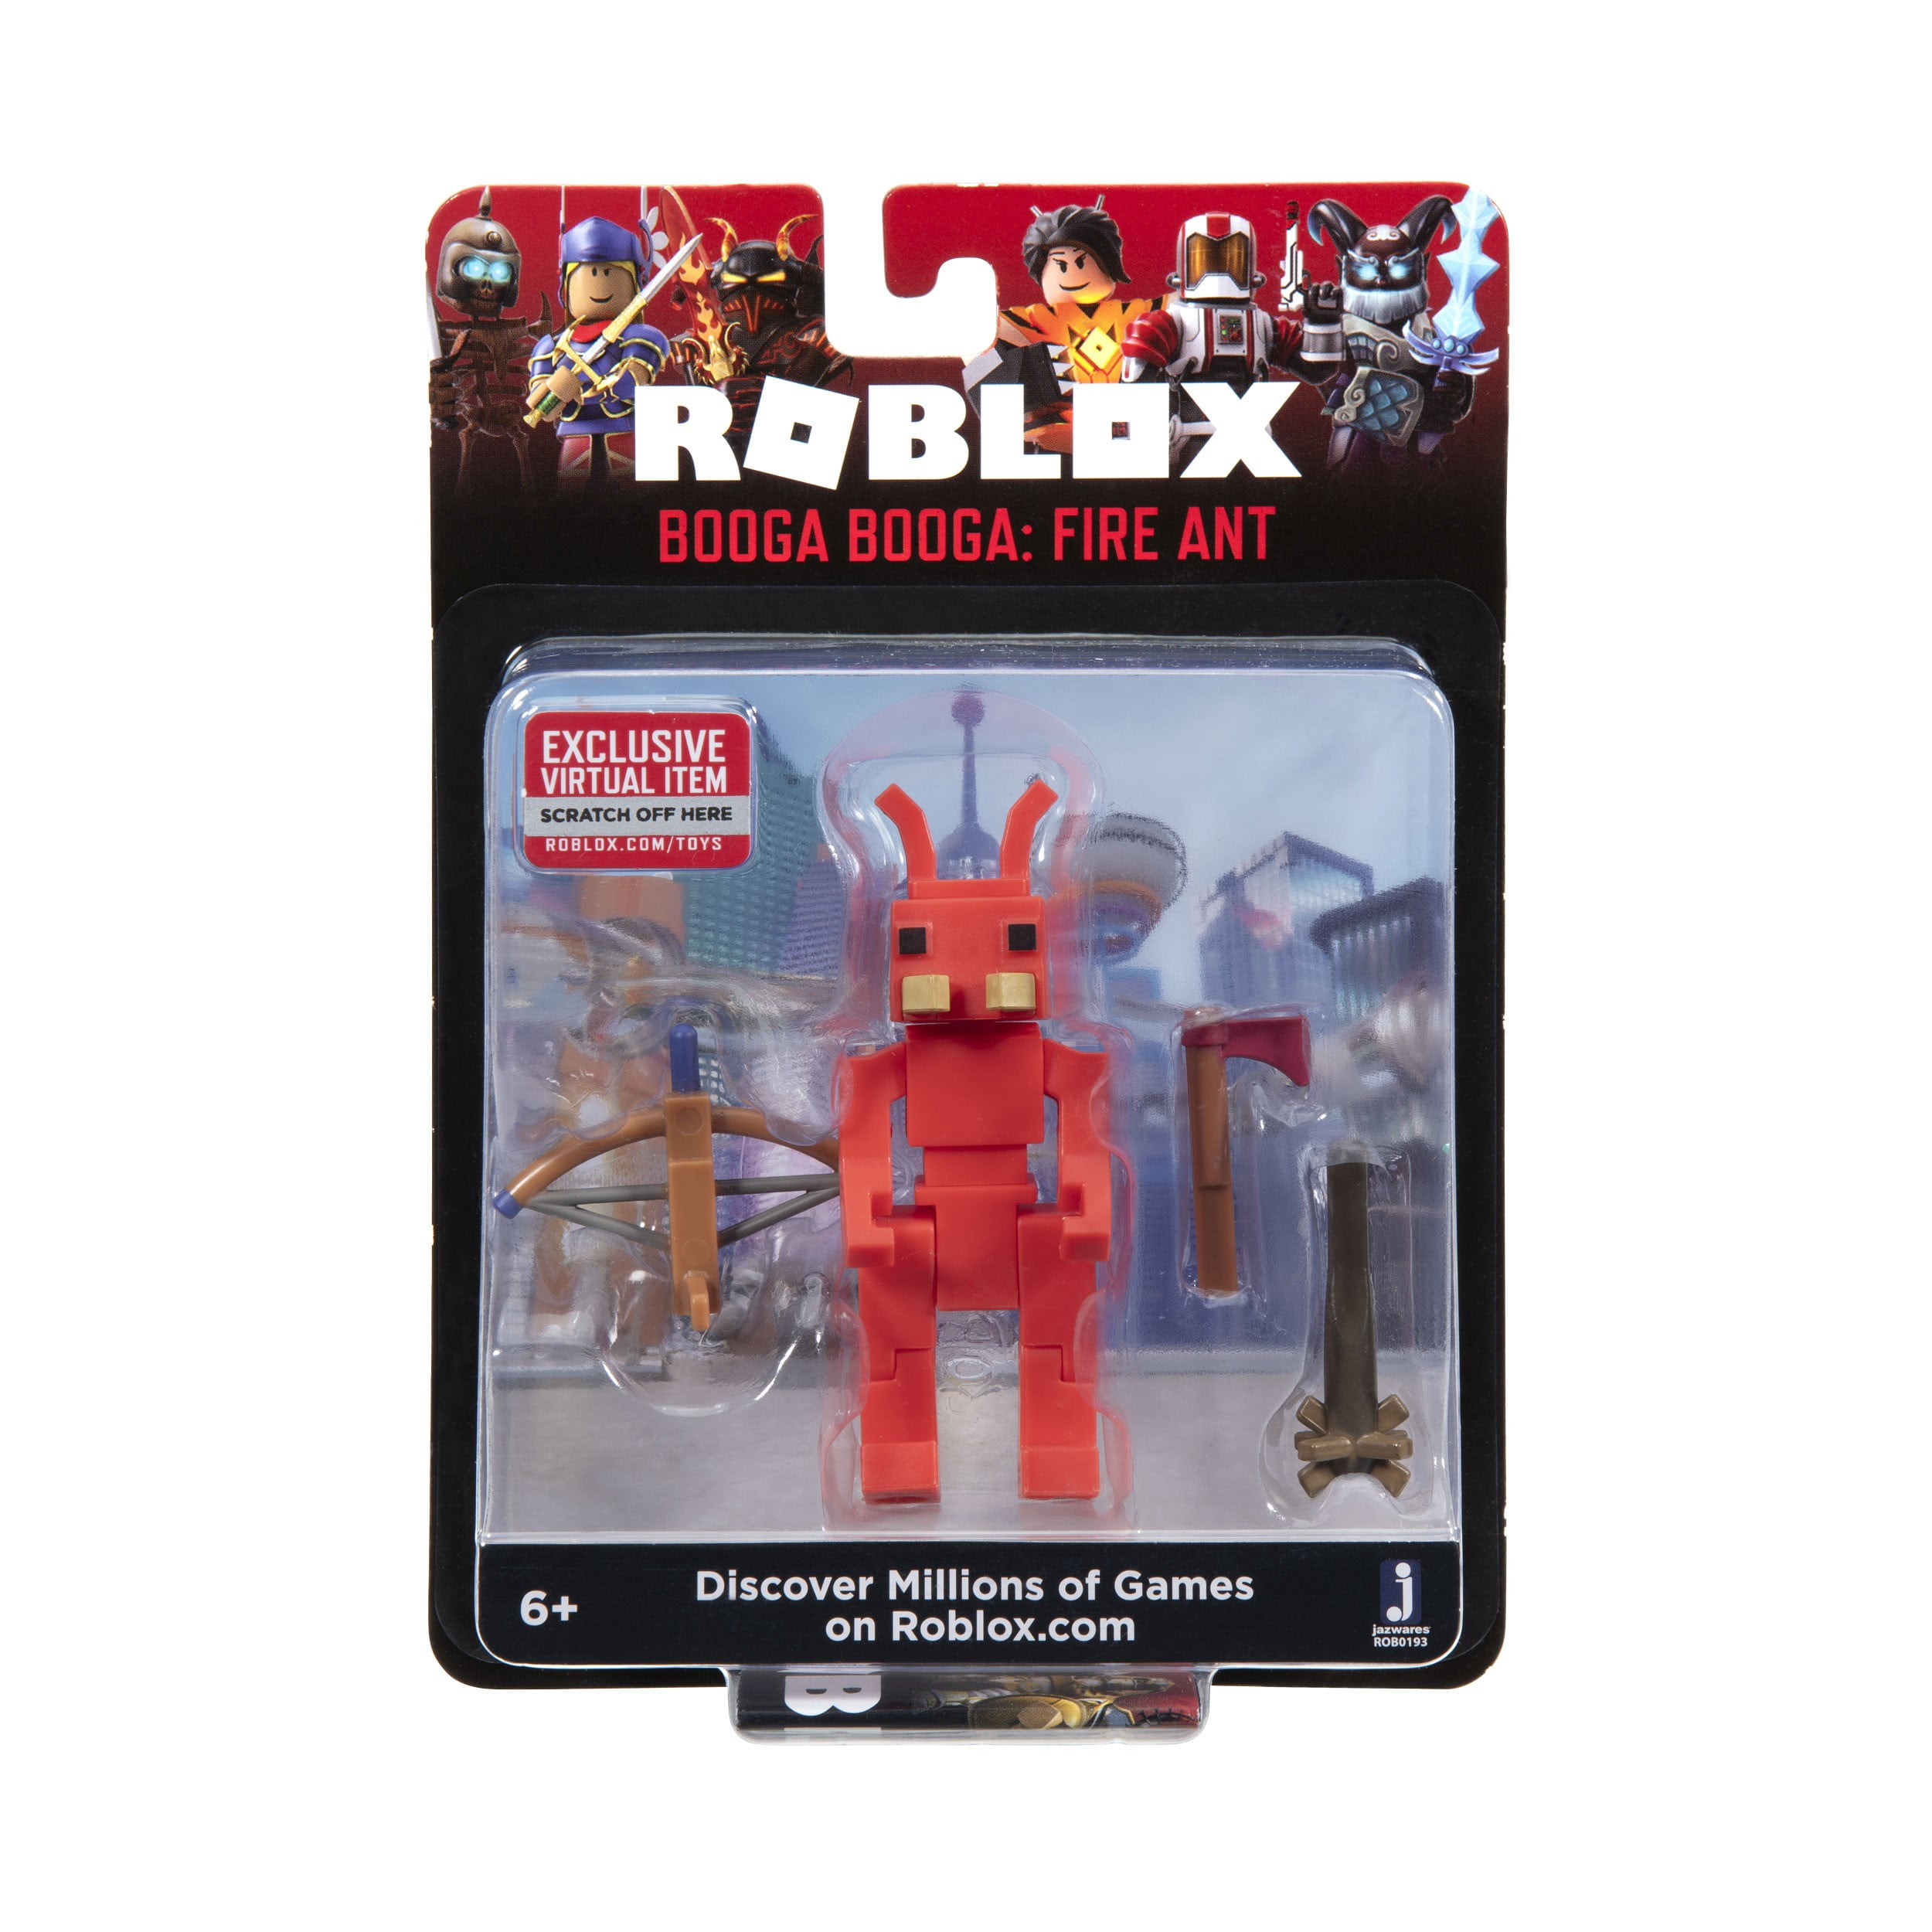 Roblox Action Collection Booga Booga Fire Ant Figure Pack Includes Exclusive Virtual Item Walmart Com Walmart Com - roblox booga booga how to get jelly